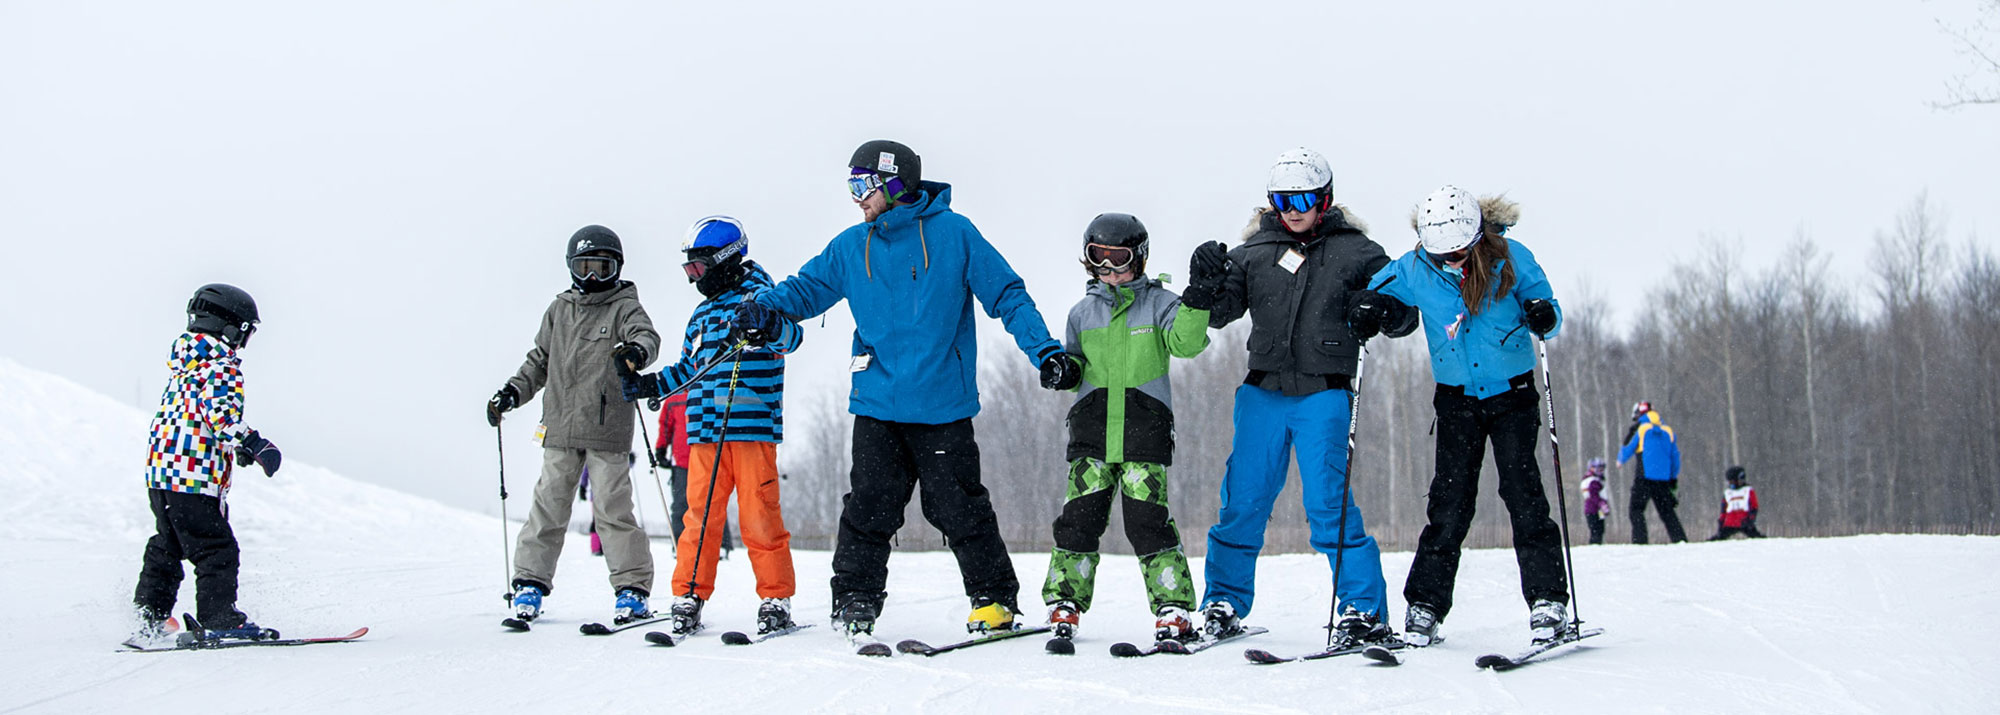 The Ultimate Winter Sport For Kids